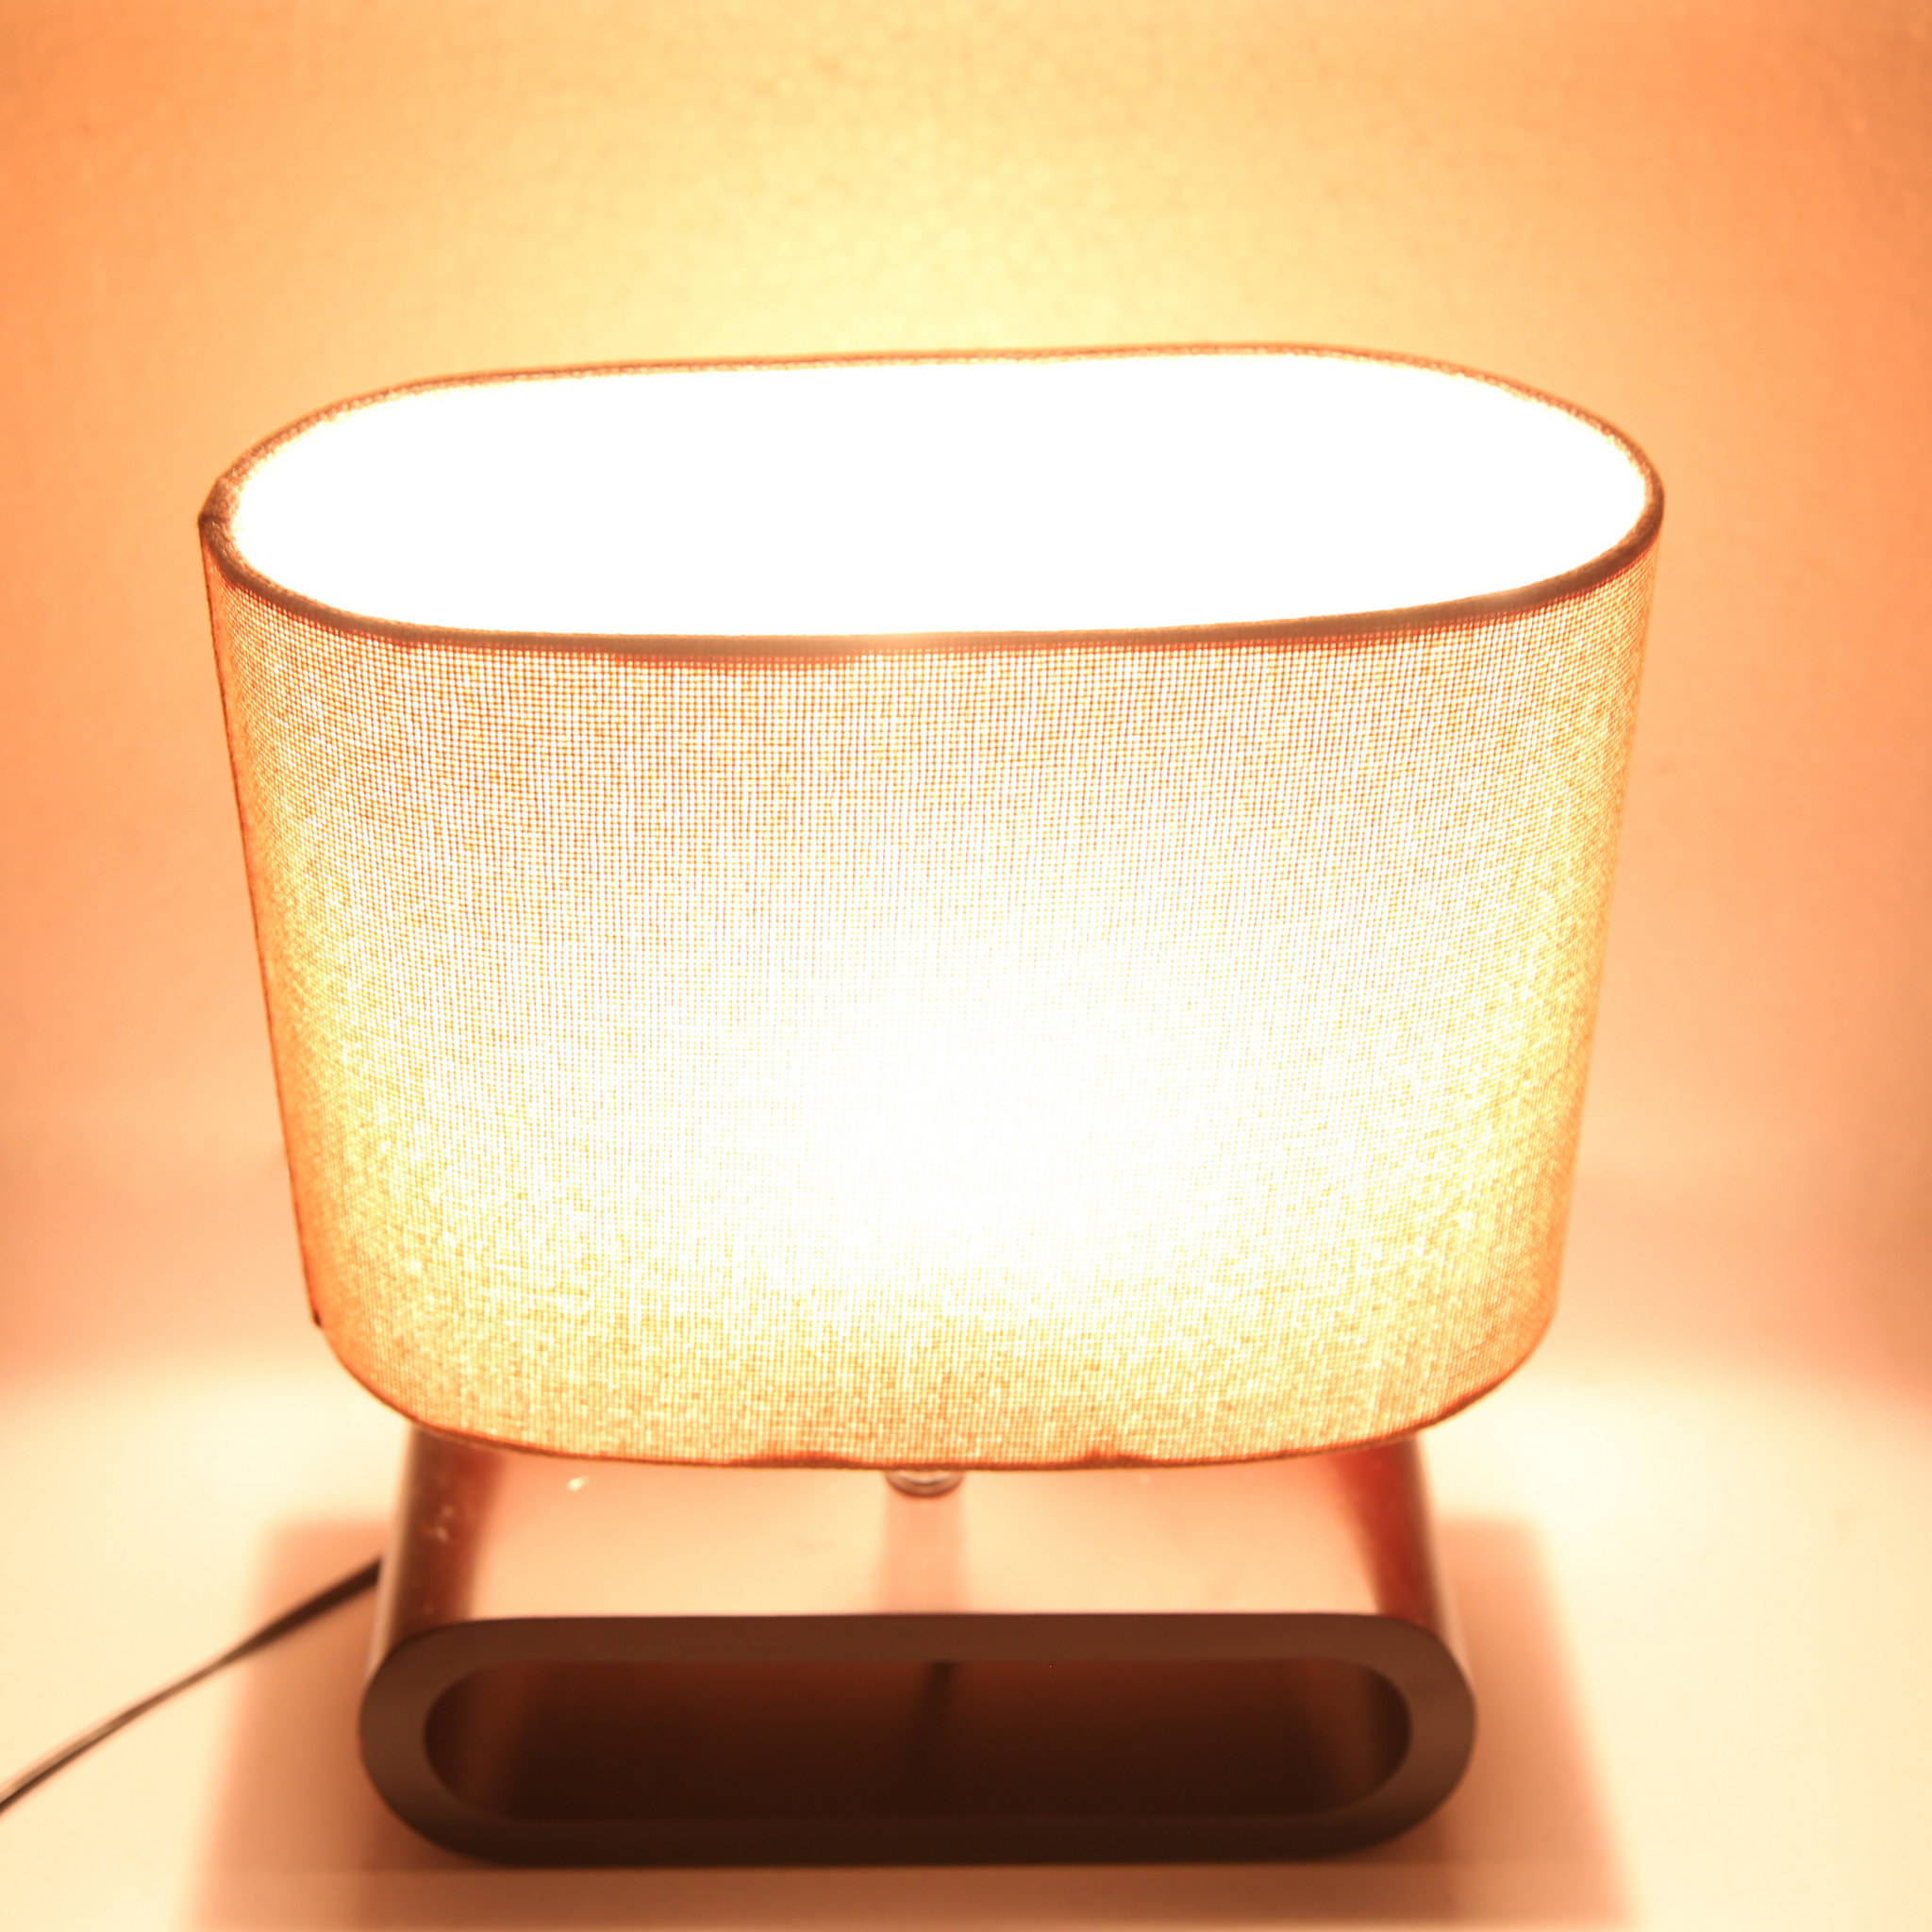 Groove Table Lamp